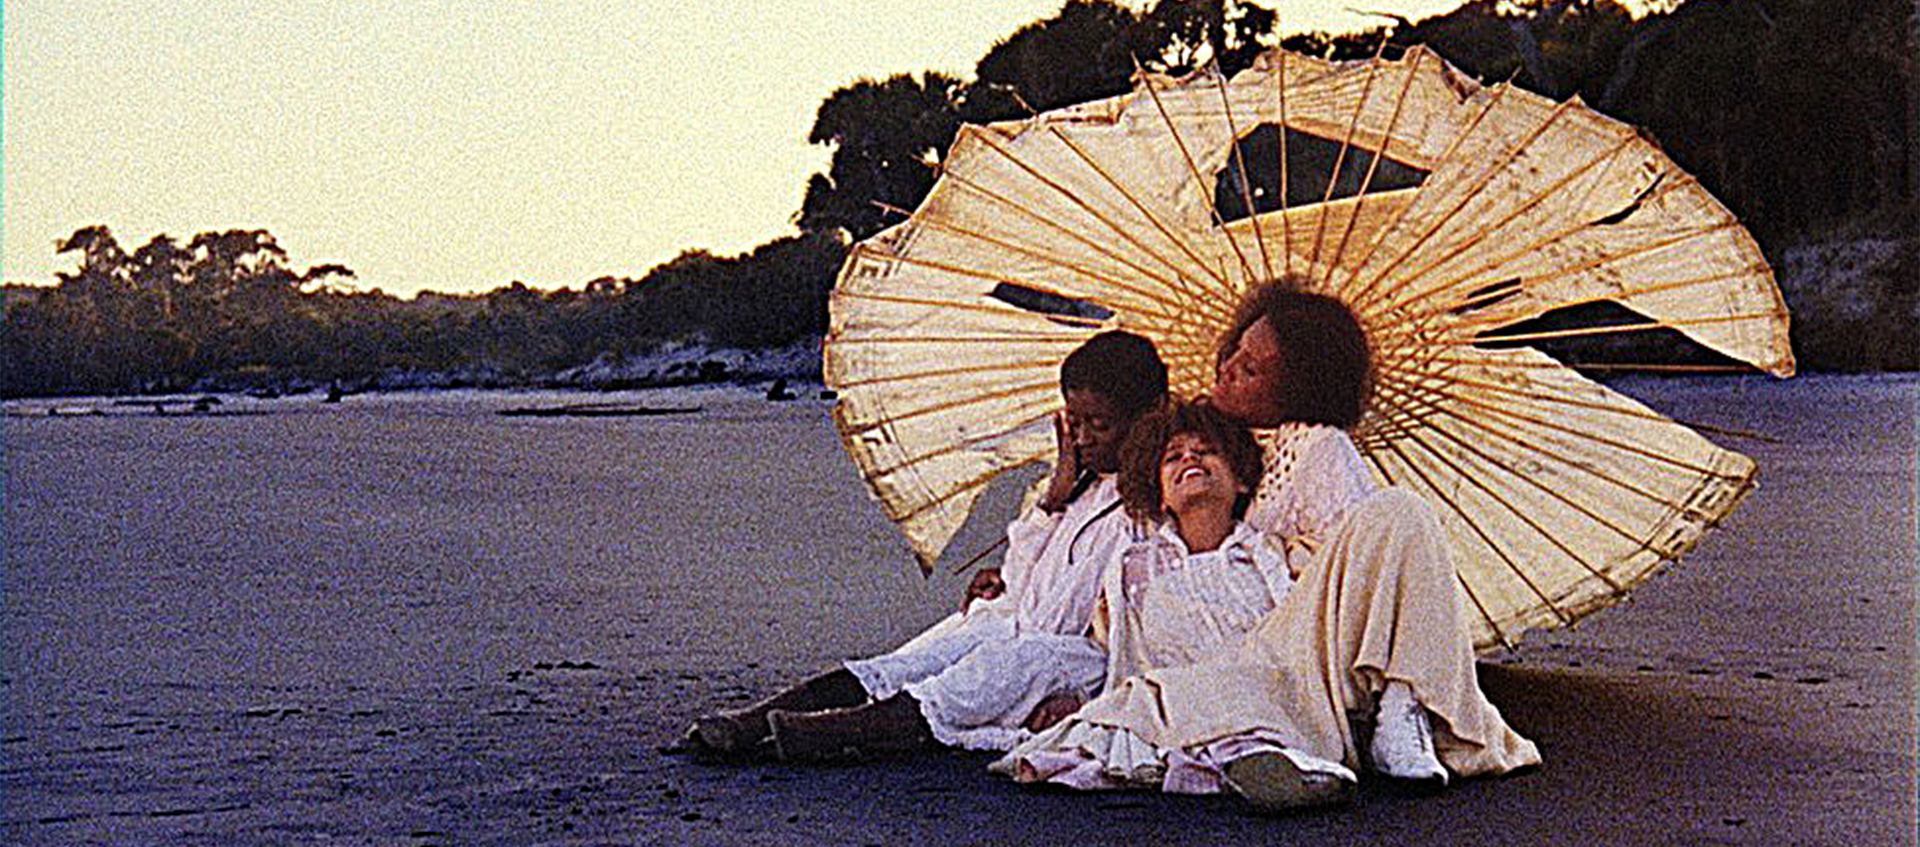 A scene from Julie Dash's Daughters of the Dust